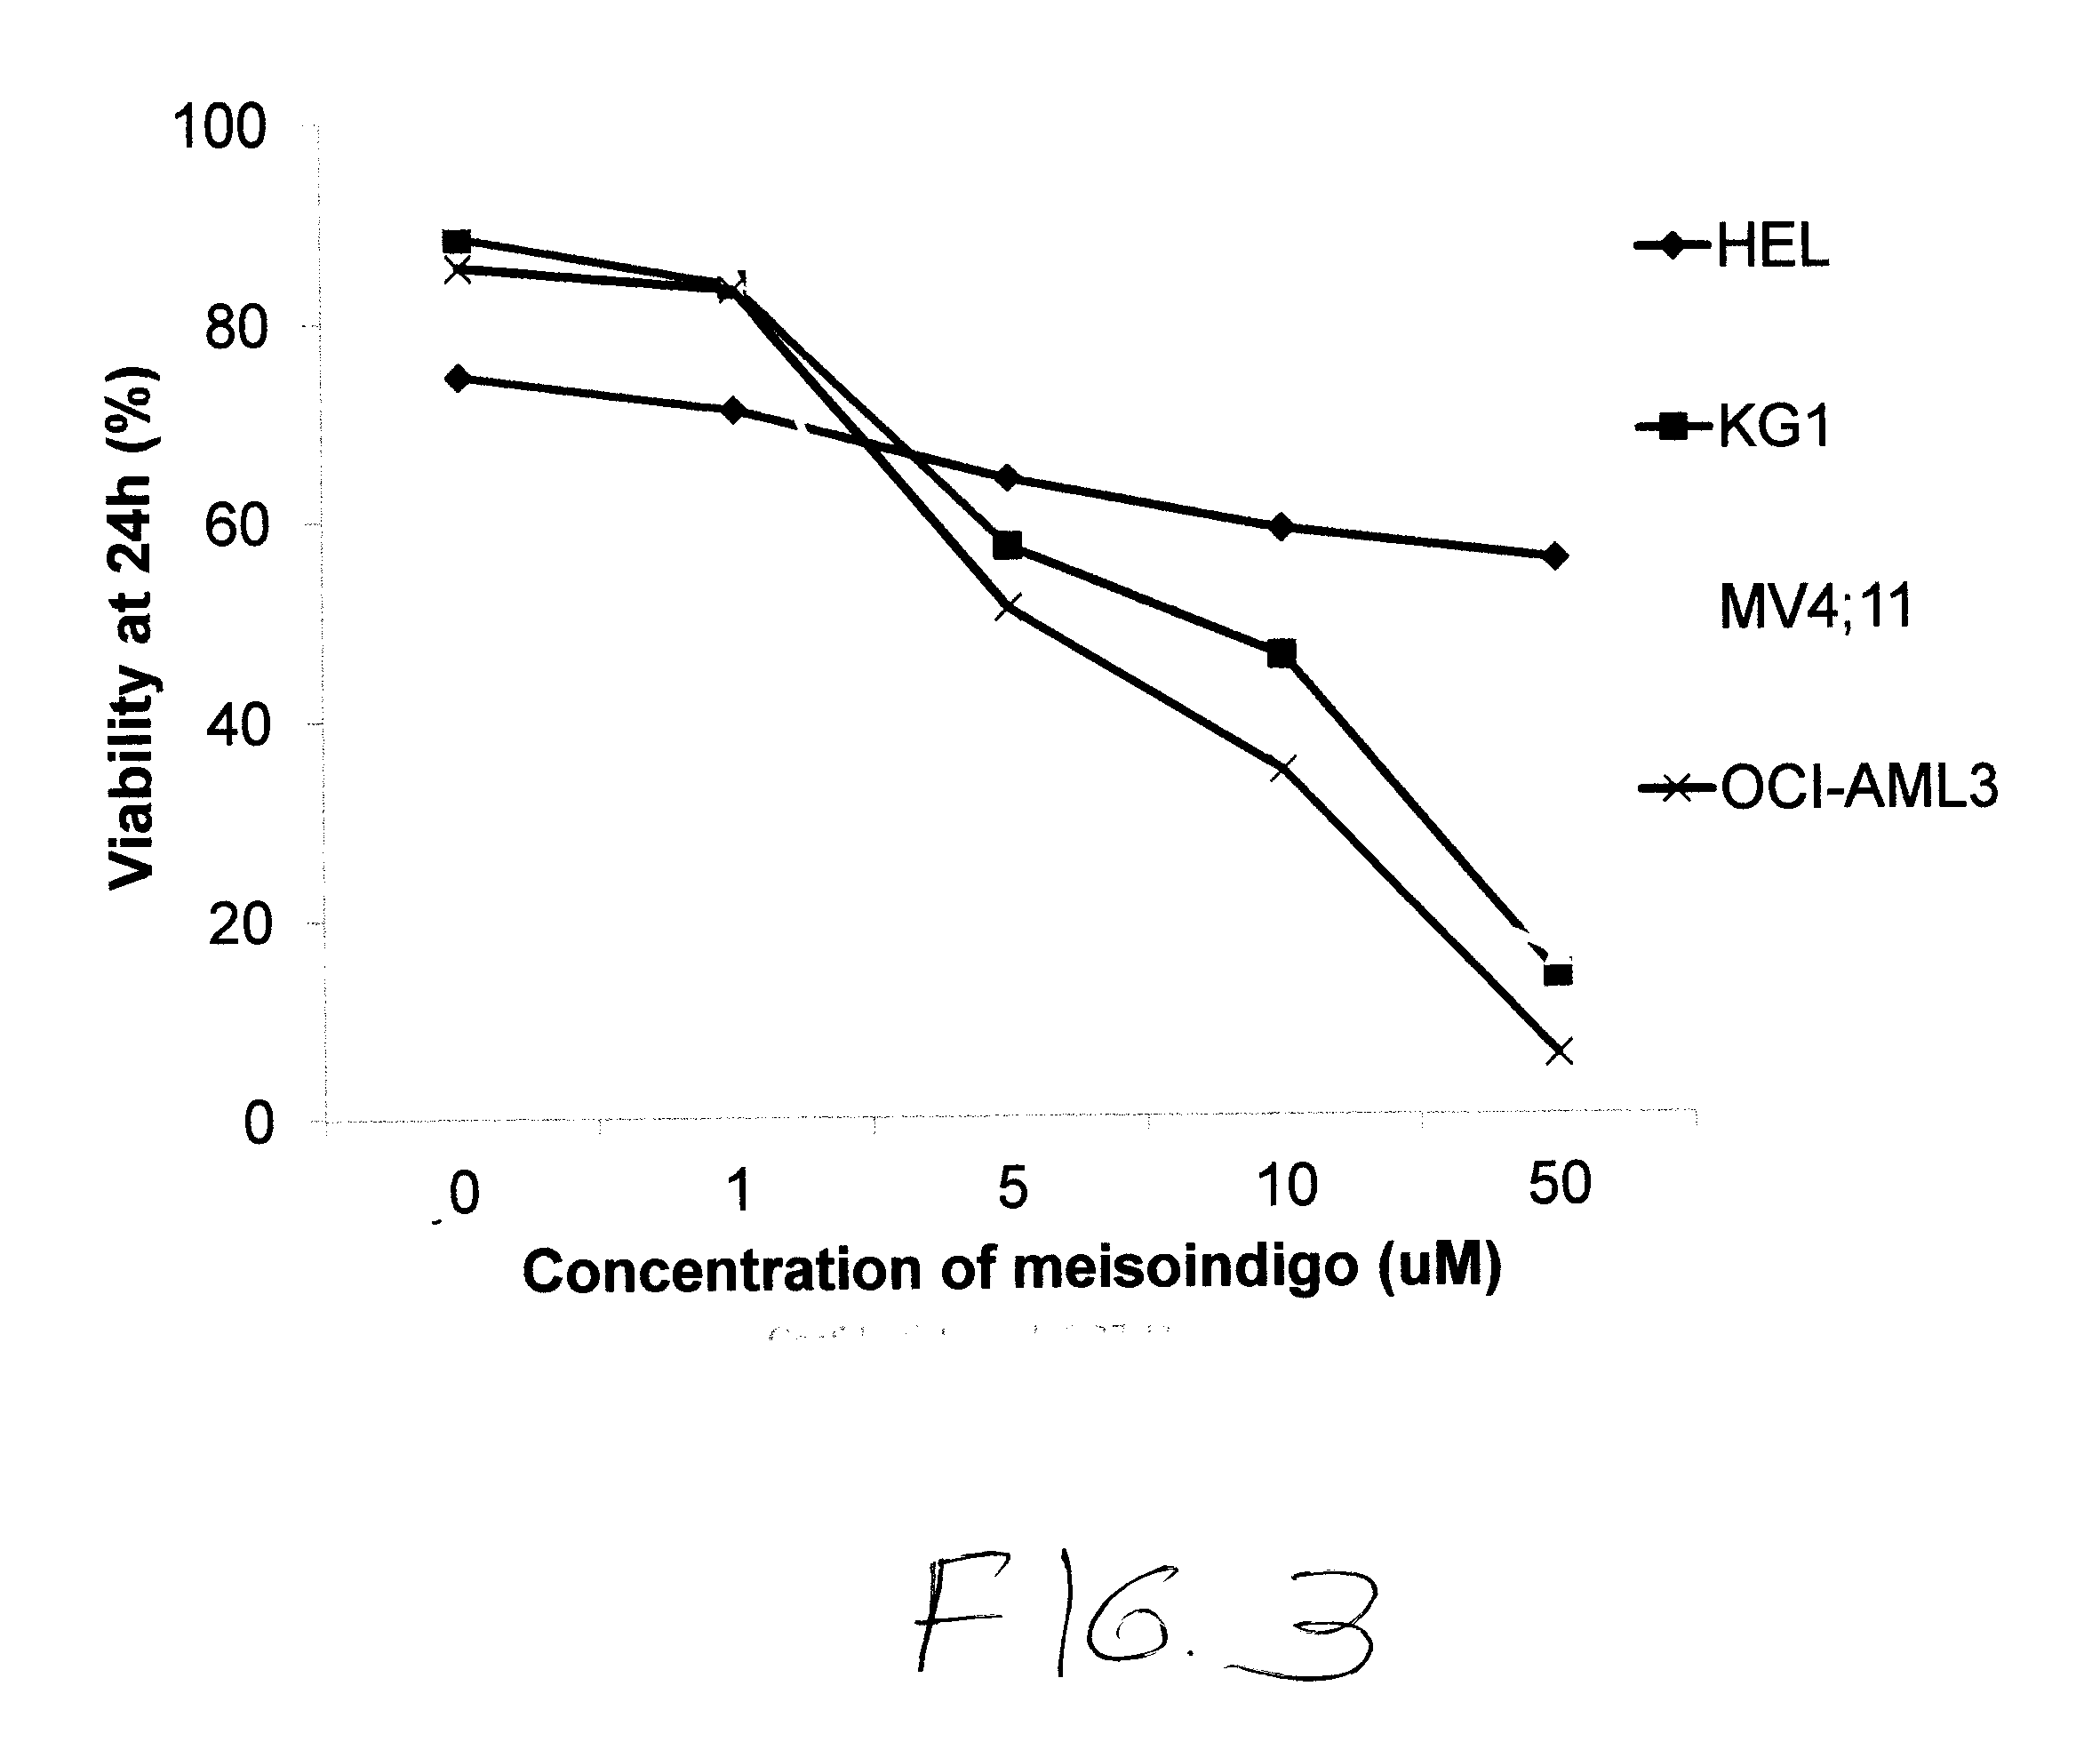 Compositions and methods to improve the therapeutic benefit of indirubin and analogs thereof, including meisoindigo